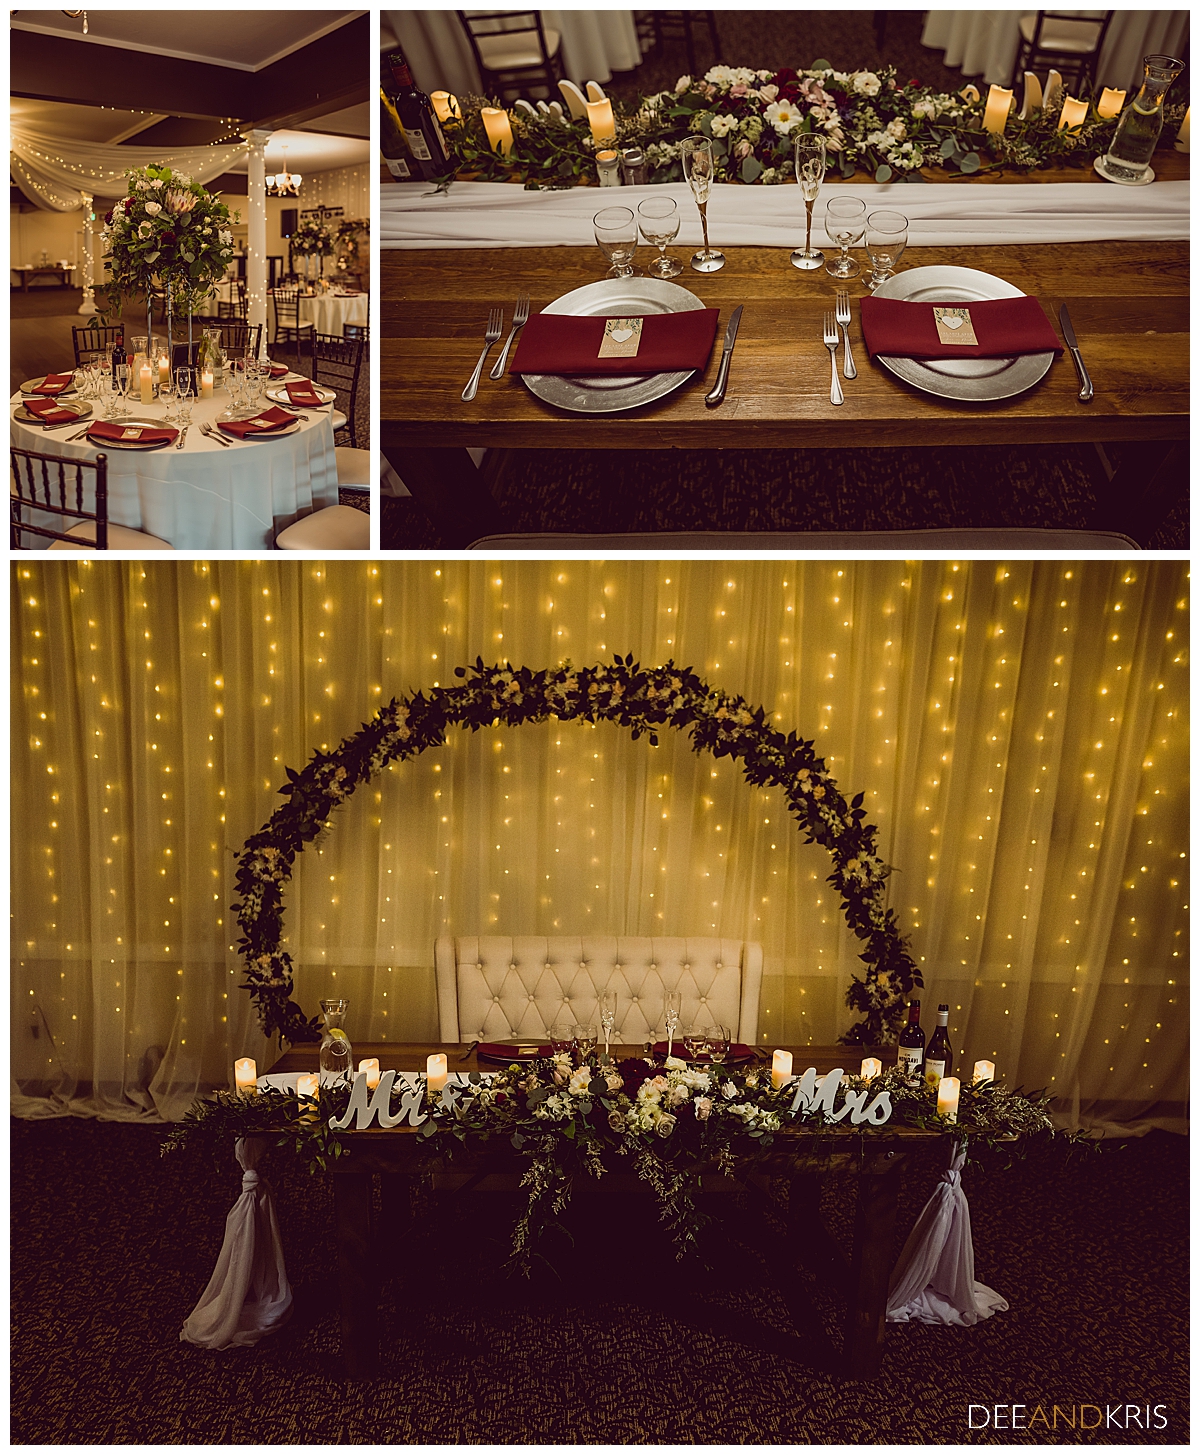 Three color images: Top left of table with candles and setting. Top right close-up of table setting. Bottom image of sweetheart's table with floral arch behind it.